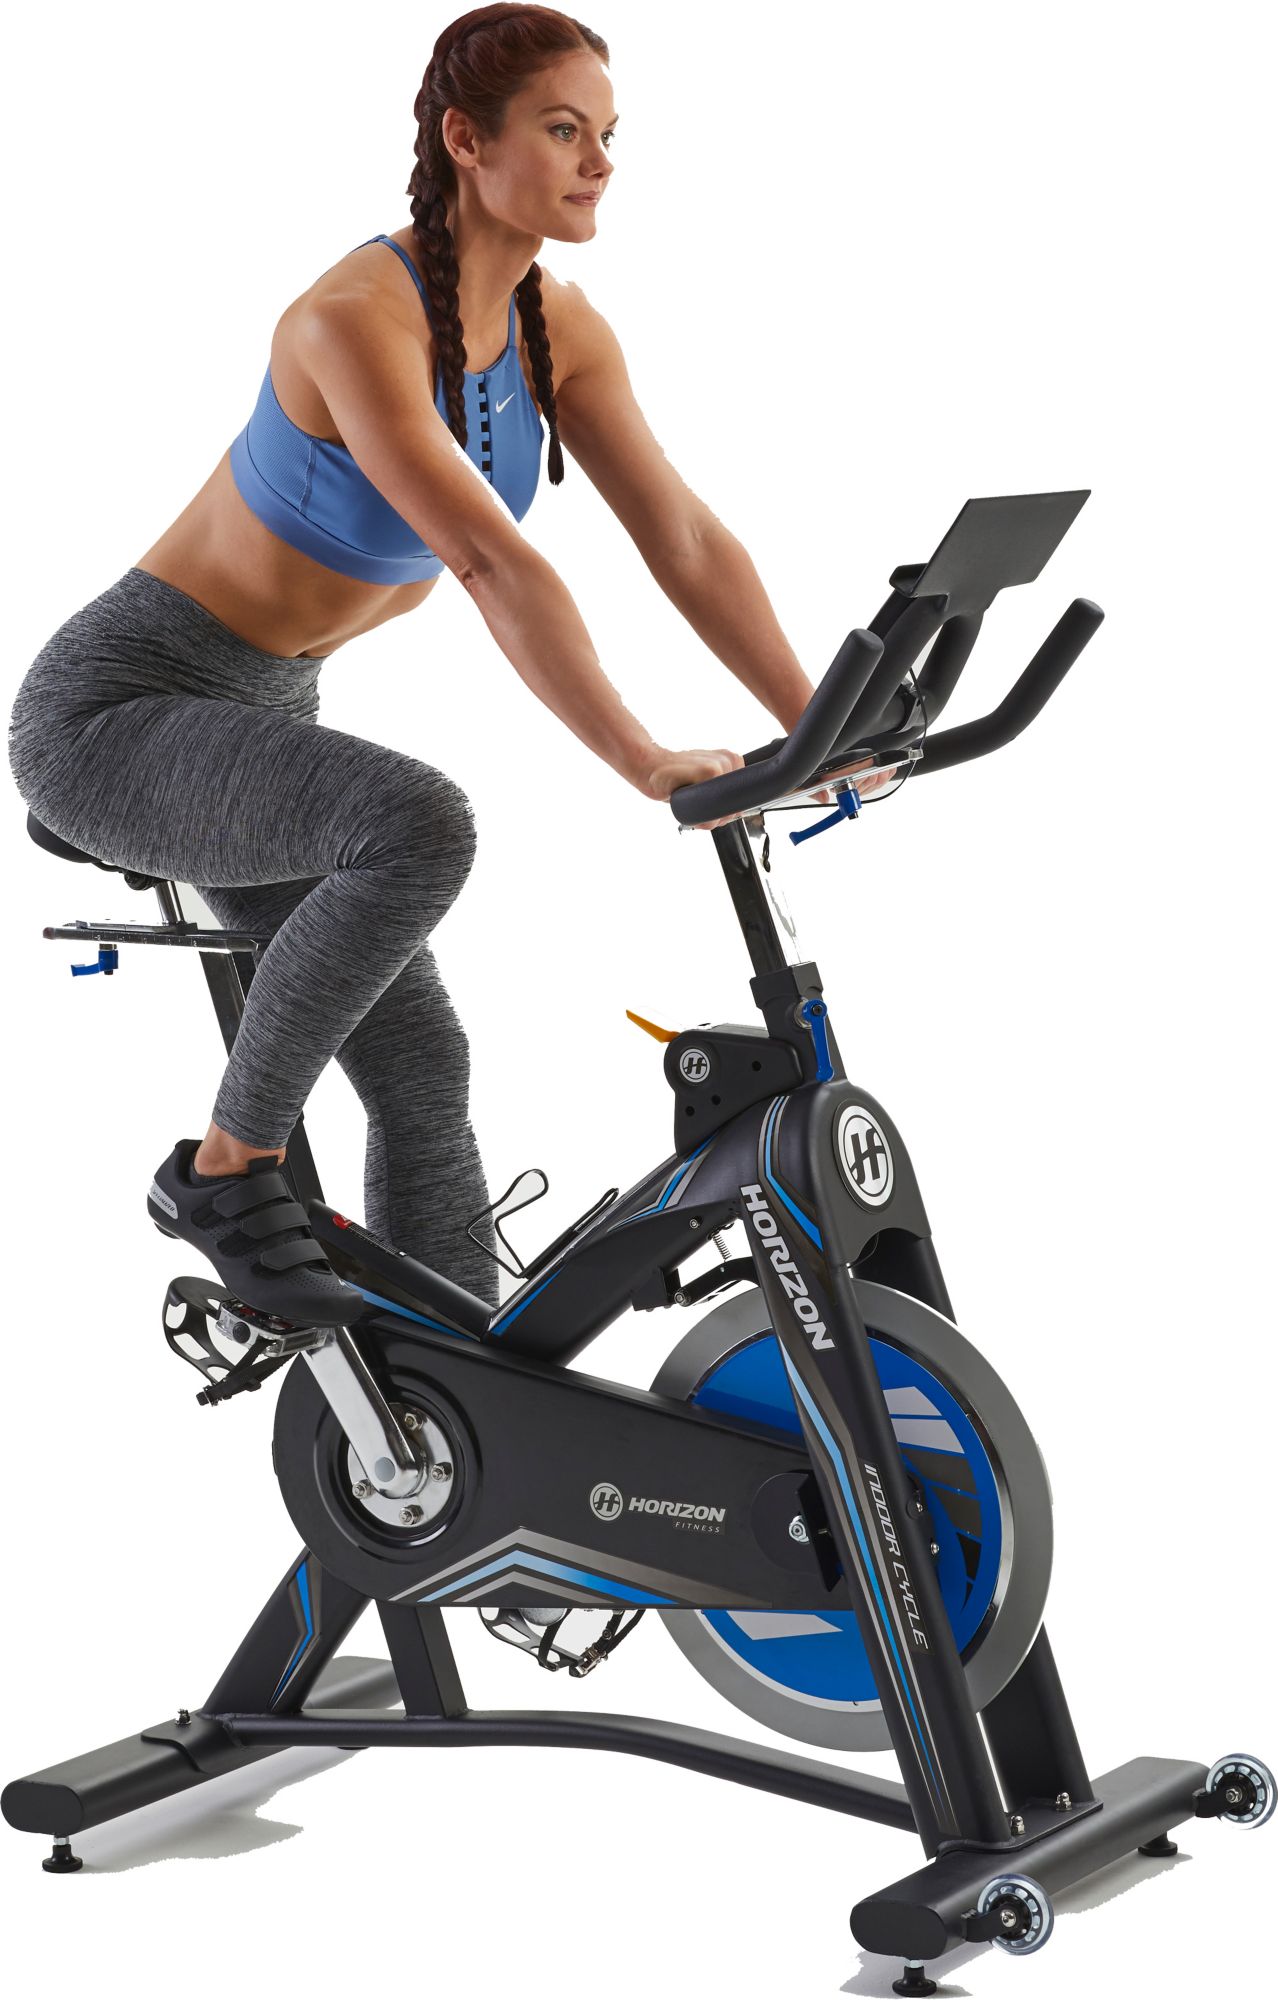 Exercise & Stationary Bikes | Best Price Guarantee at DICK'S